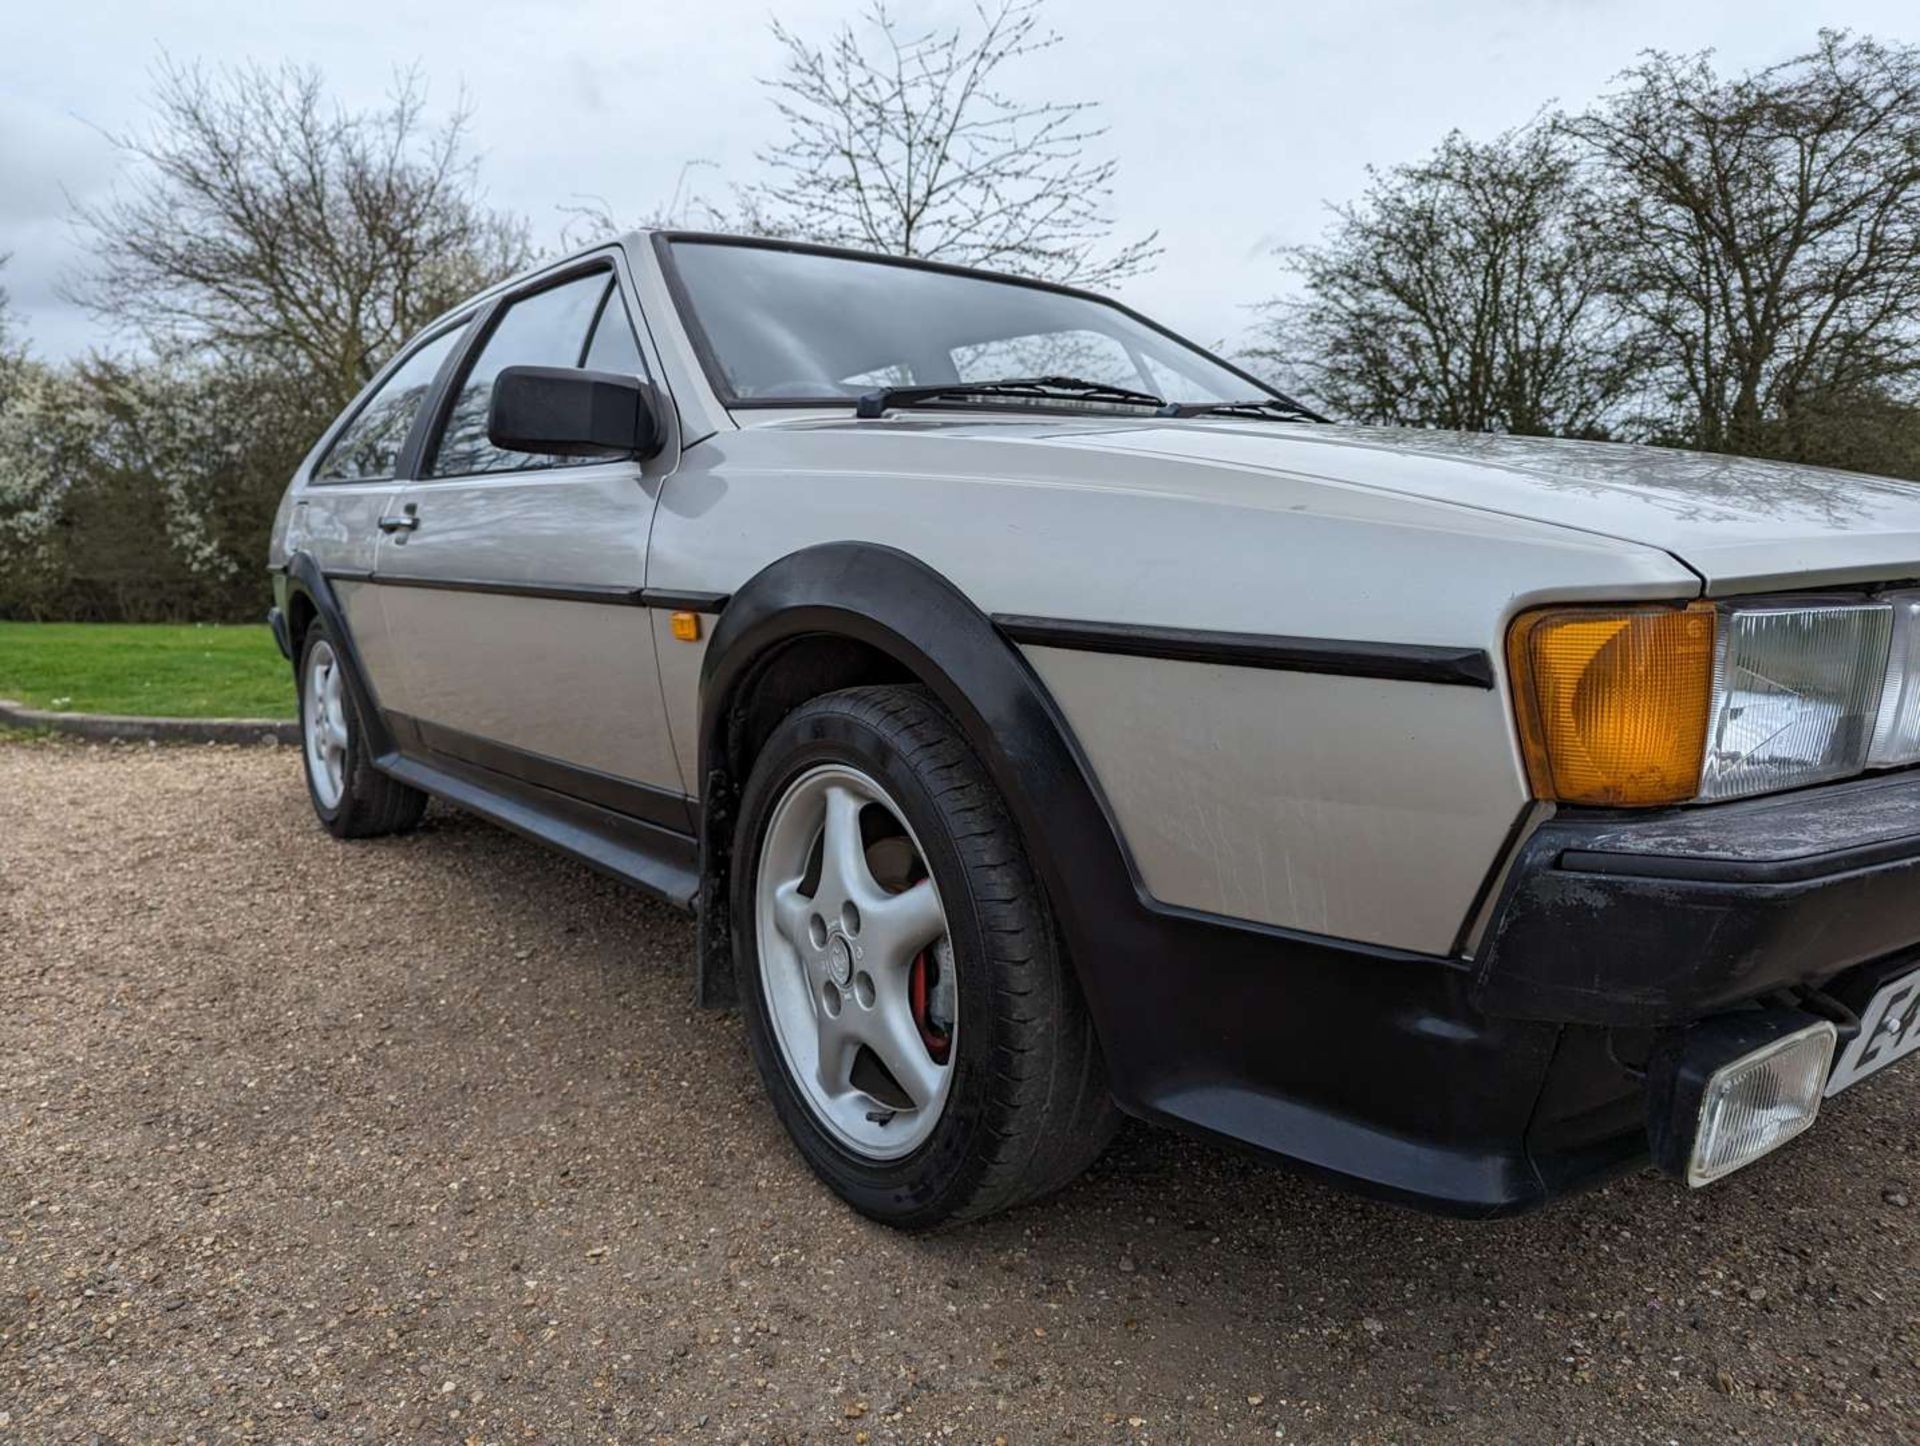 1987 VW SCIROCCO GT - Image 11 of 28